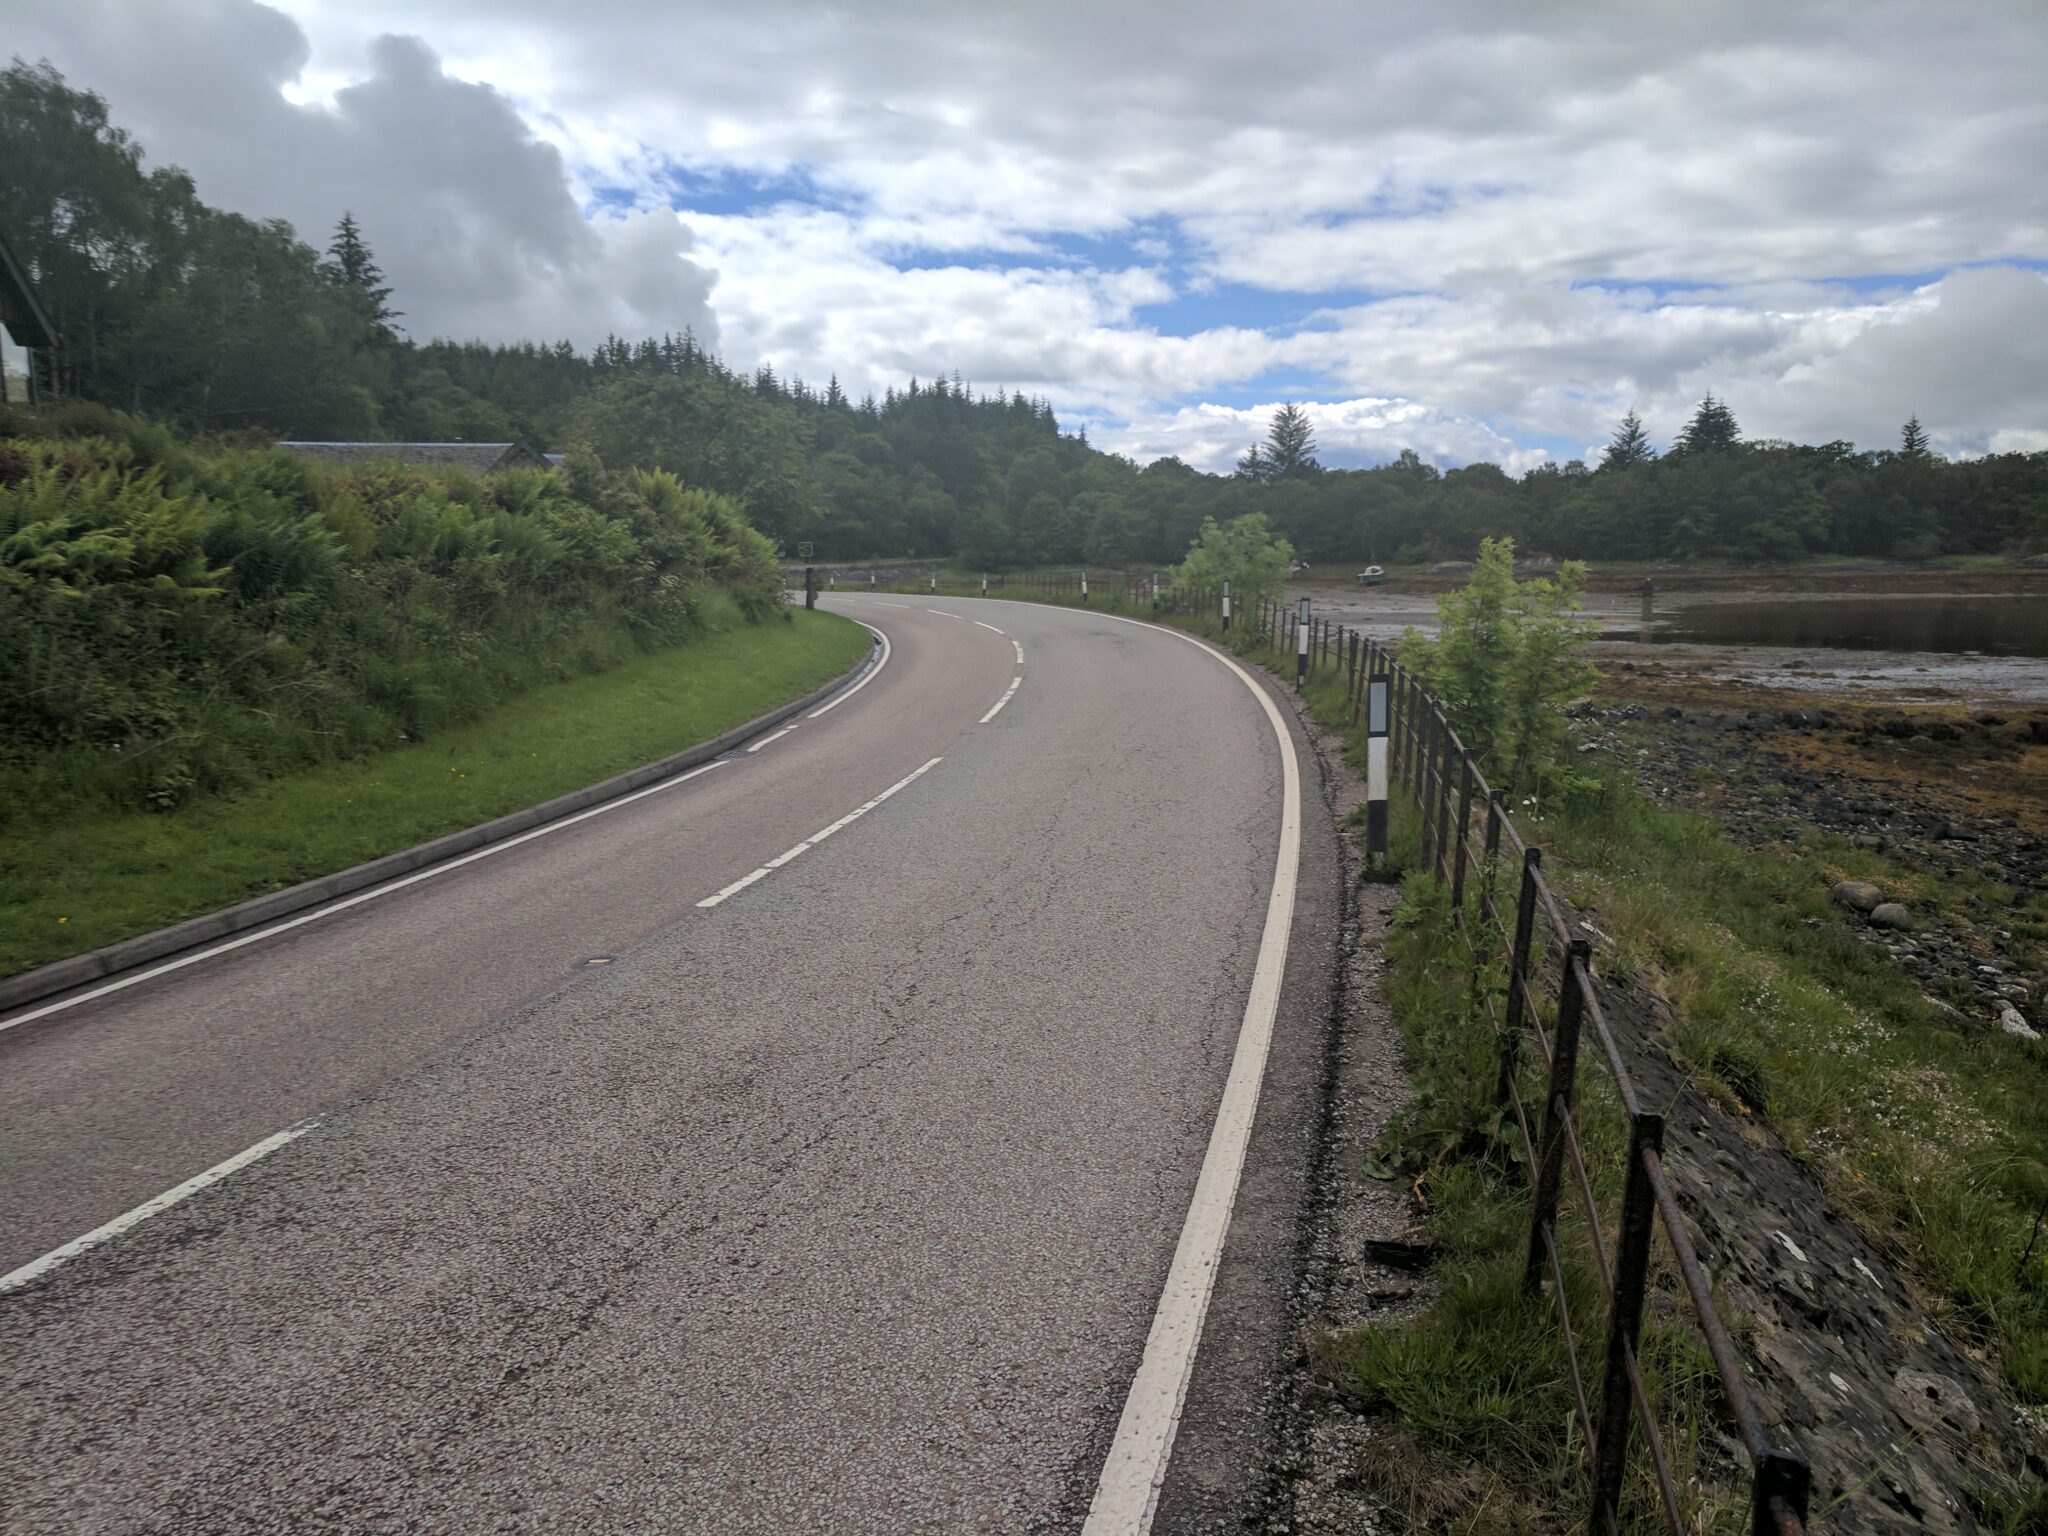 SURFACING IMPROVEMENTS PLANNED FOR THE A828